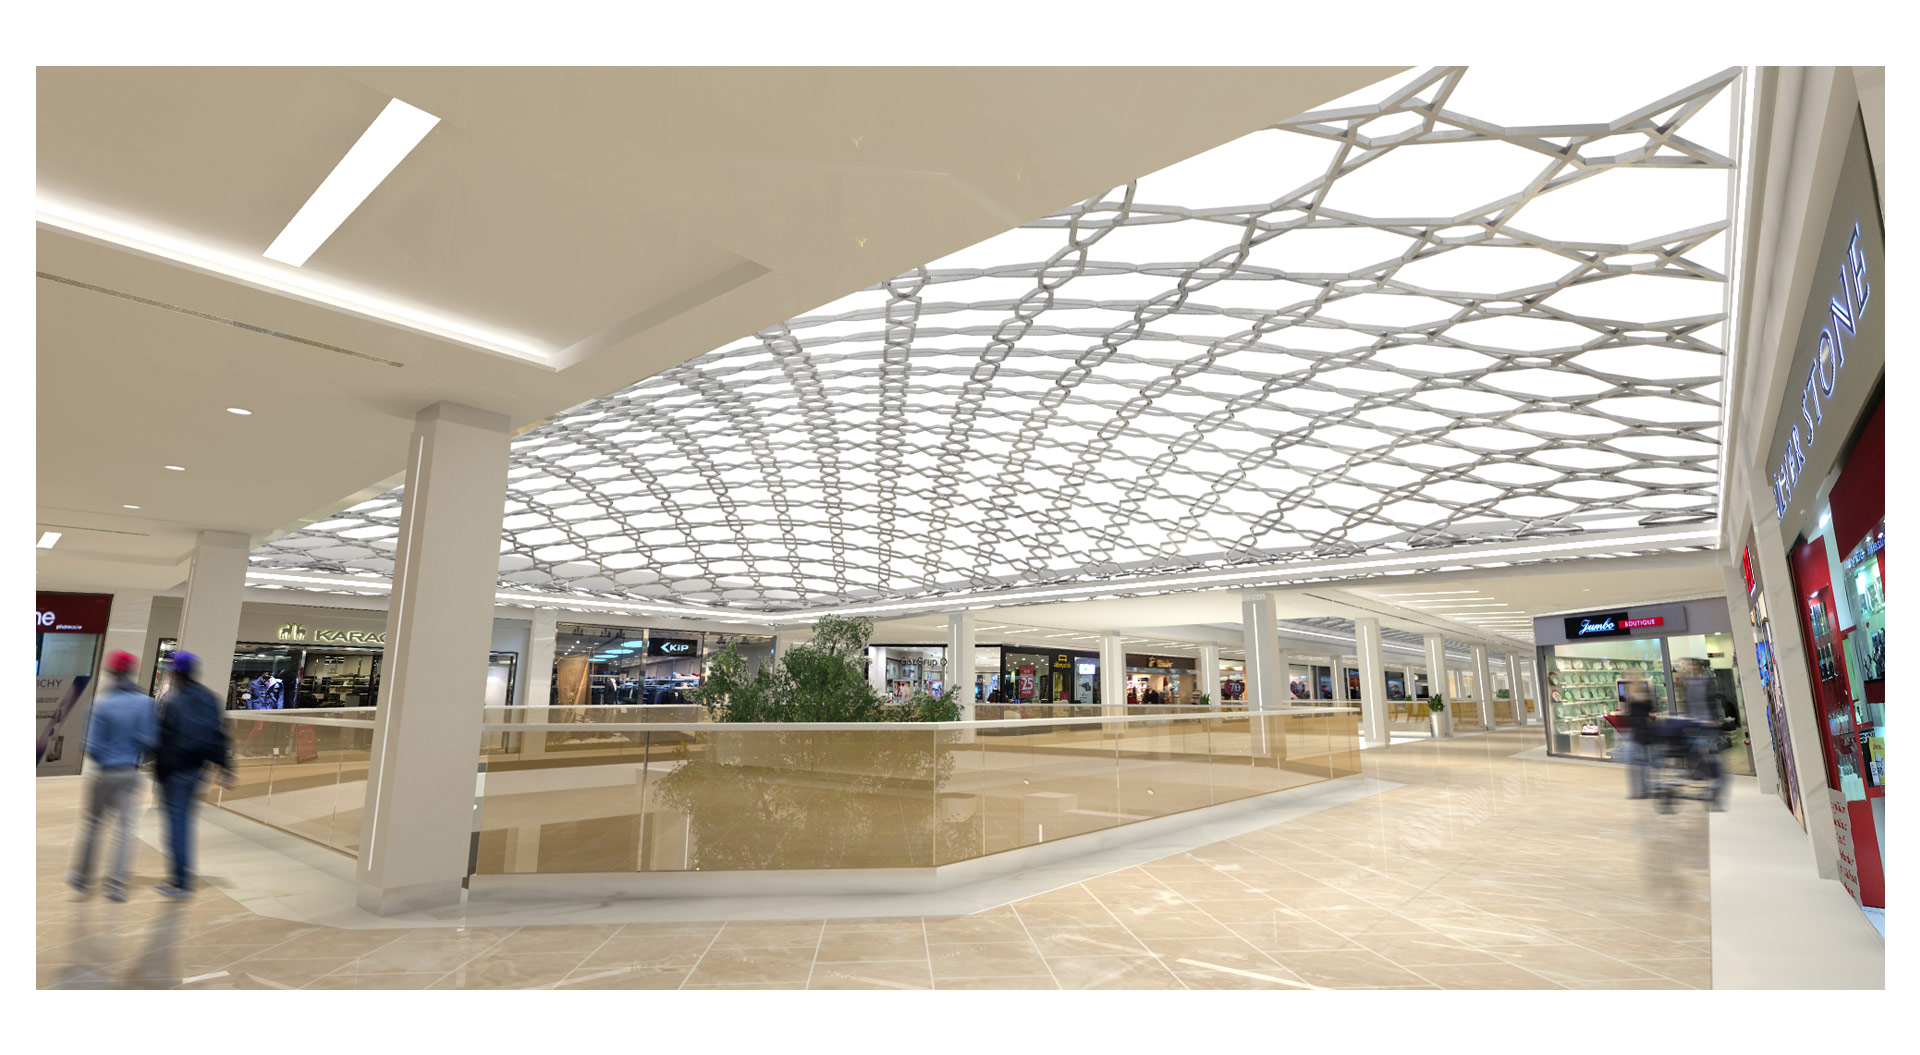 Icerenkoy shopping mall Istanbul interior design circulation and geodesic glazed roof design